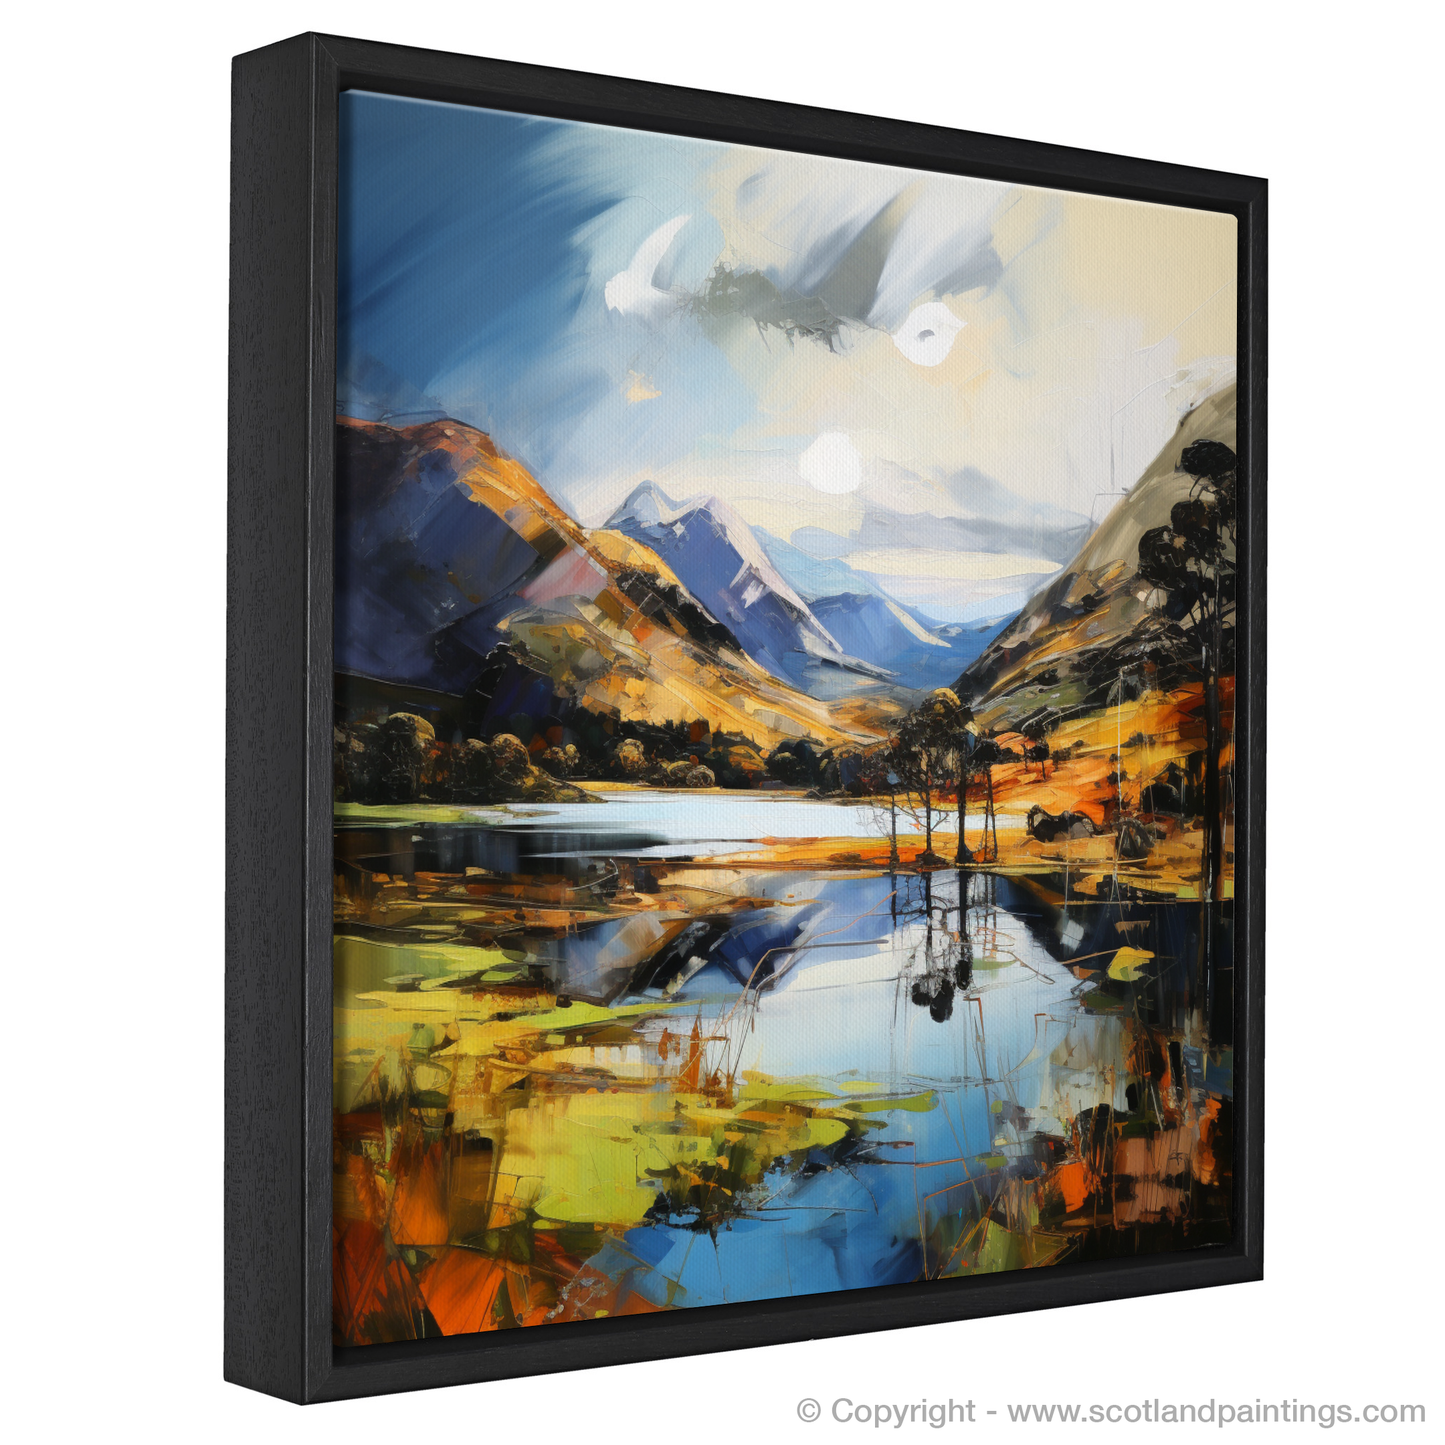 Painting and Art Print of Loch Shiel, Highlands entitled "Highland Majesty: An Expressionist Homage to Loch Shiel".